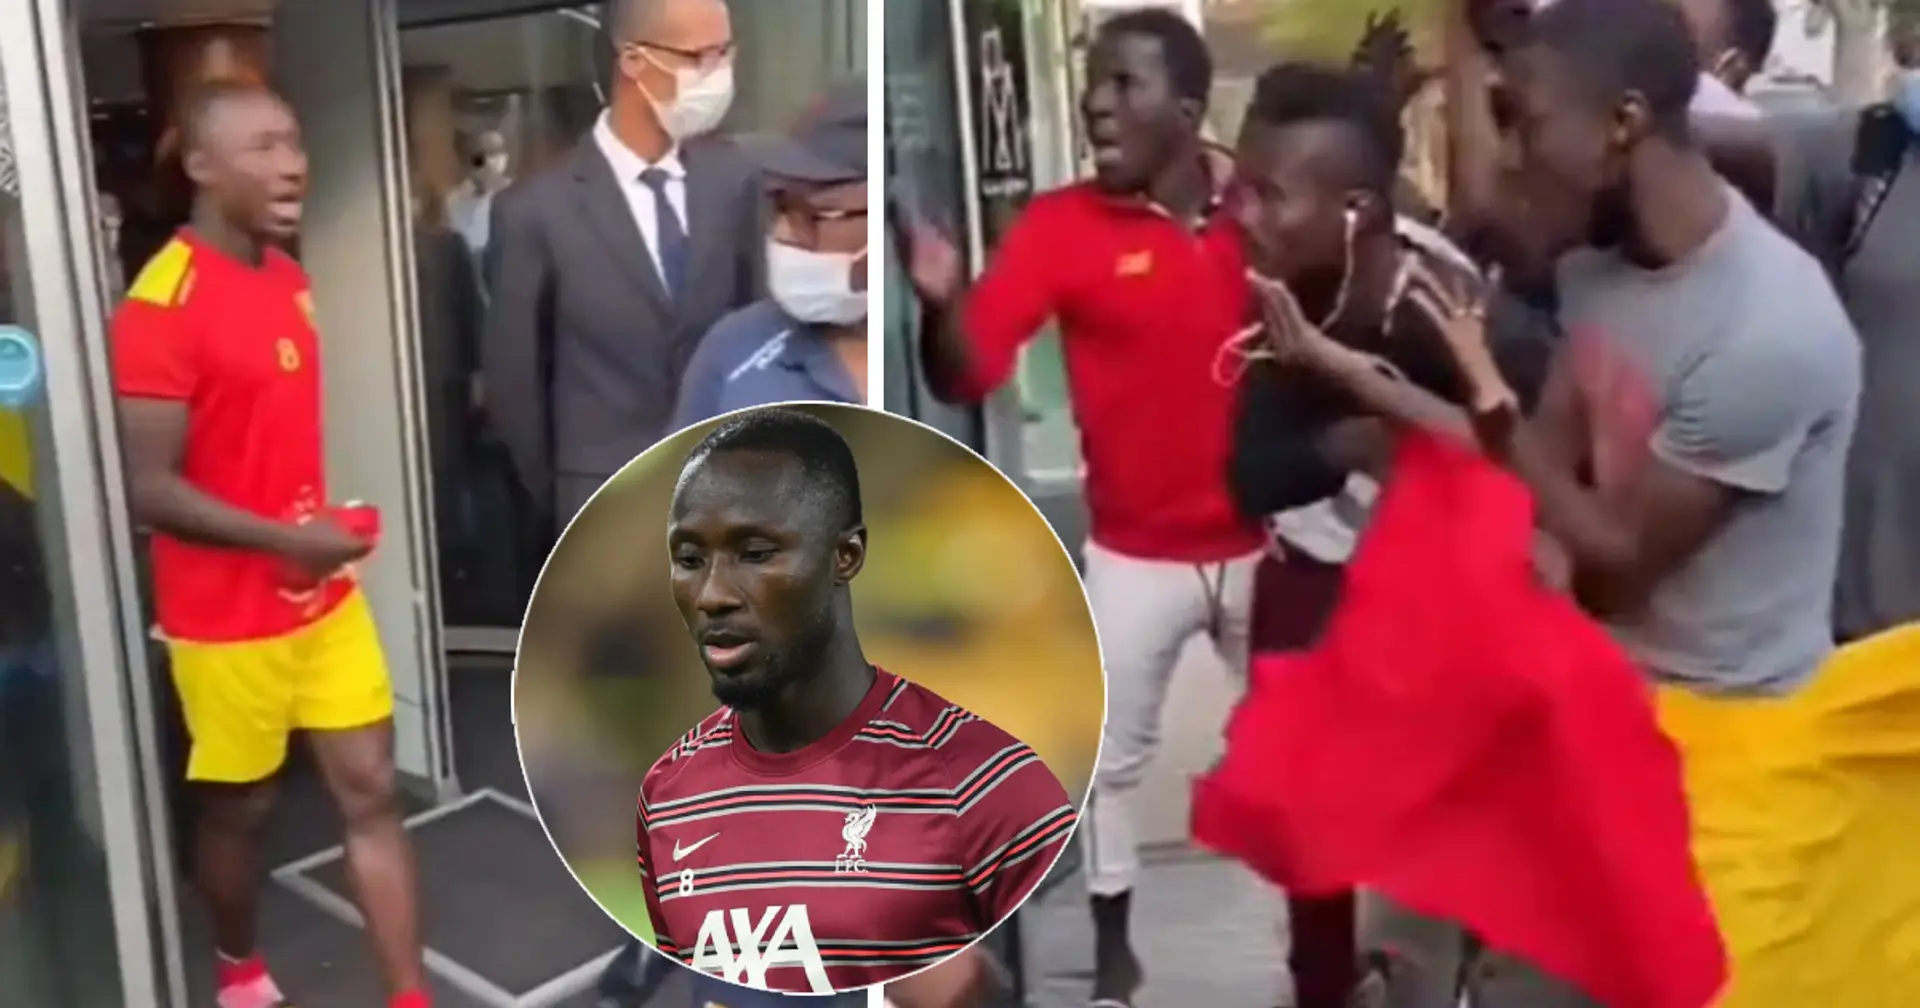 Caught on camera: Naby Keita swamped by fans while on international duty with Guinea